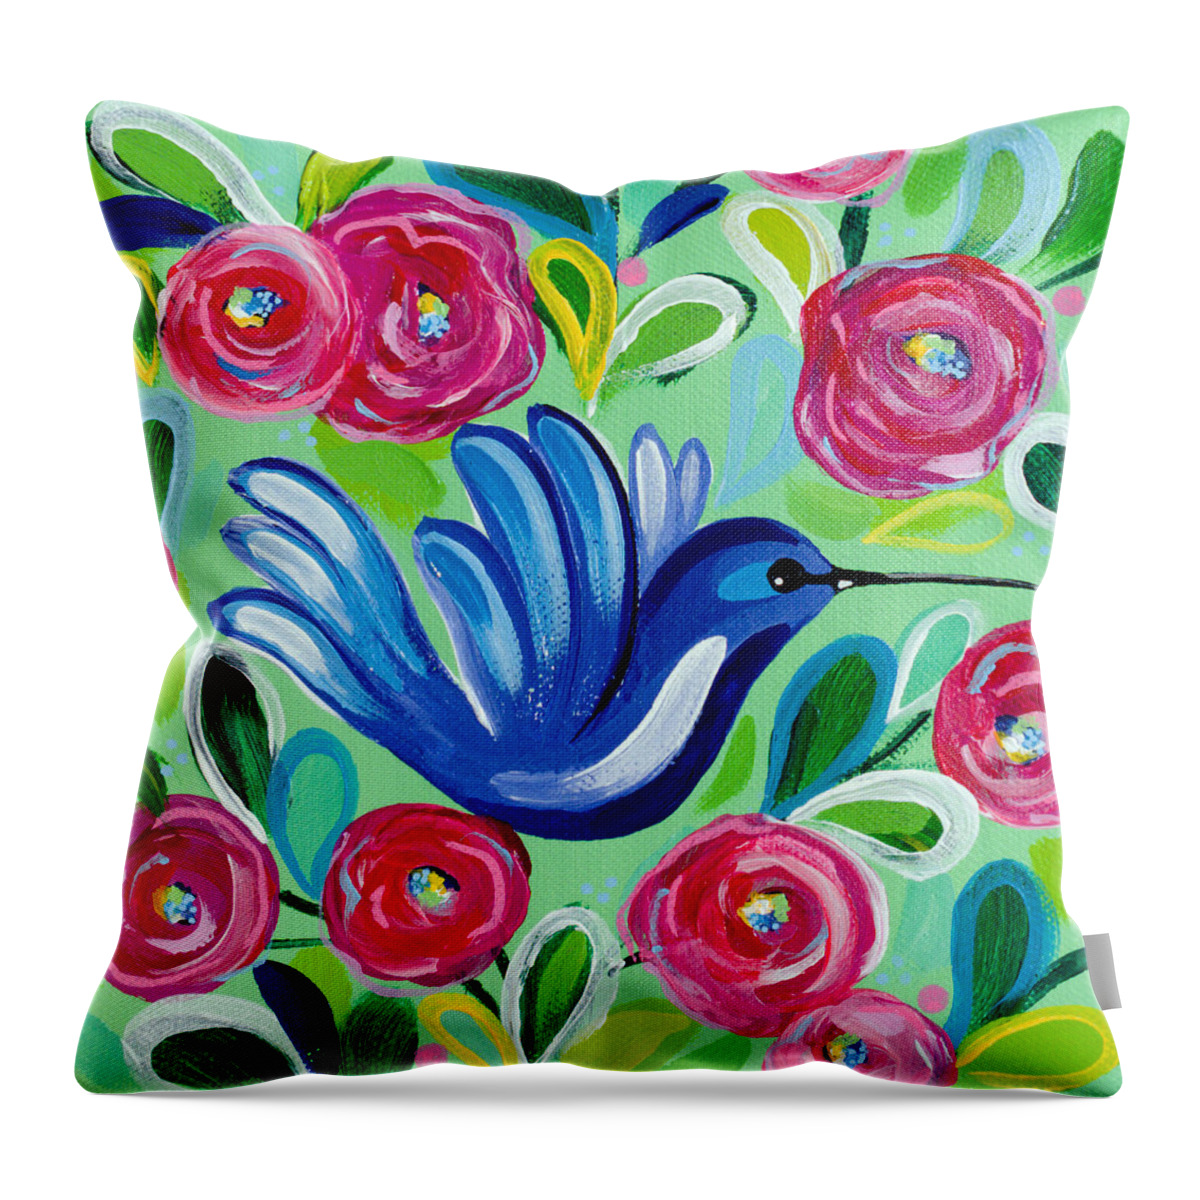 Hummingbird Throw Pillow featuring the painting Flying High by Beth Ann Scott